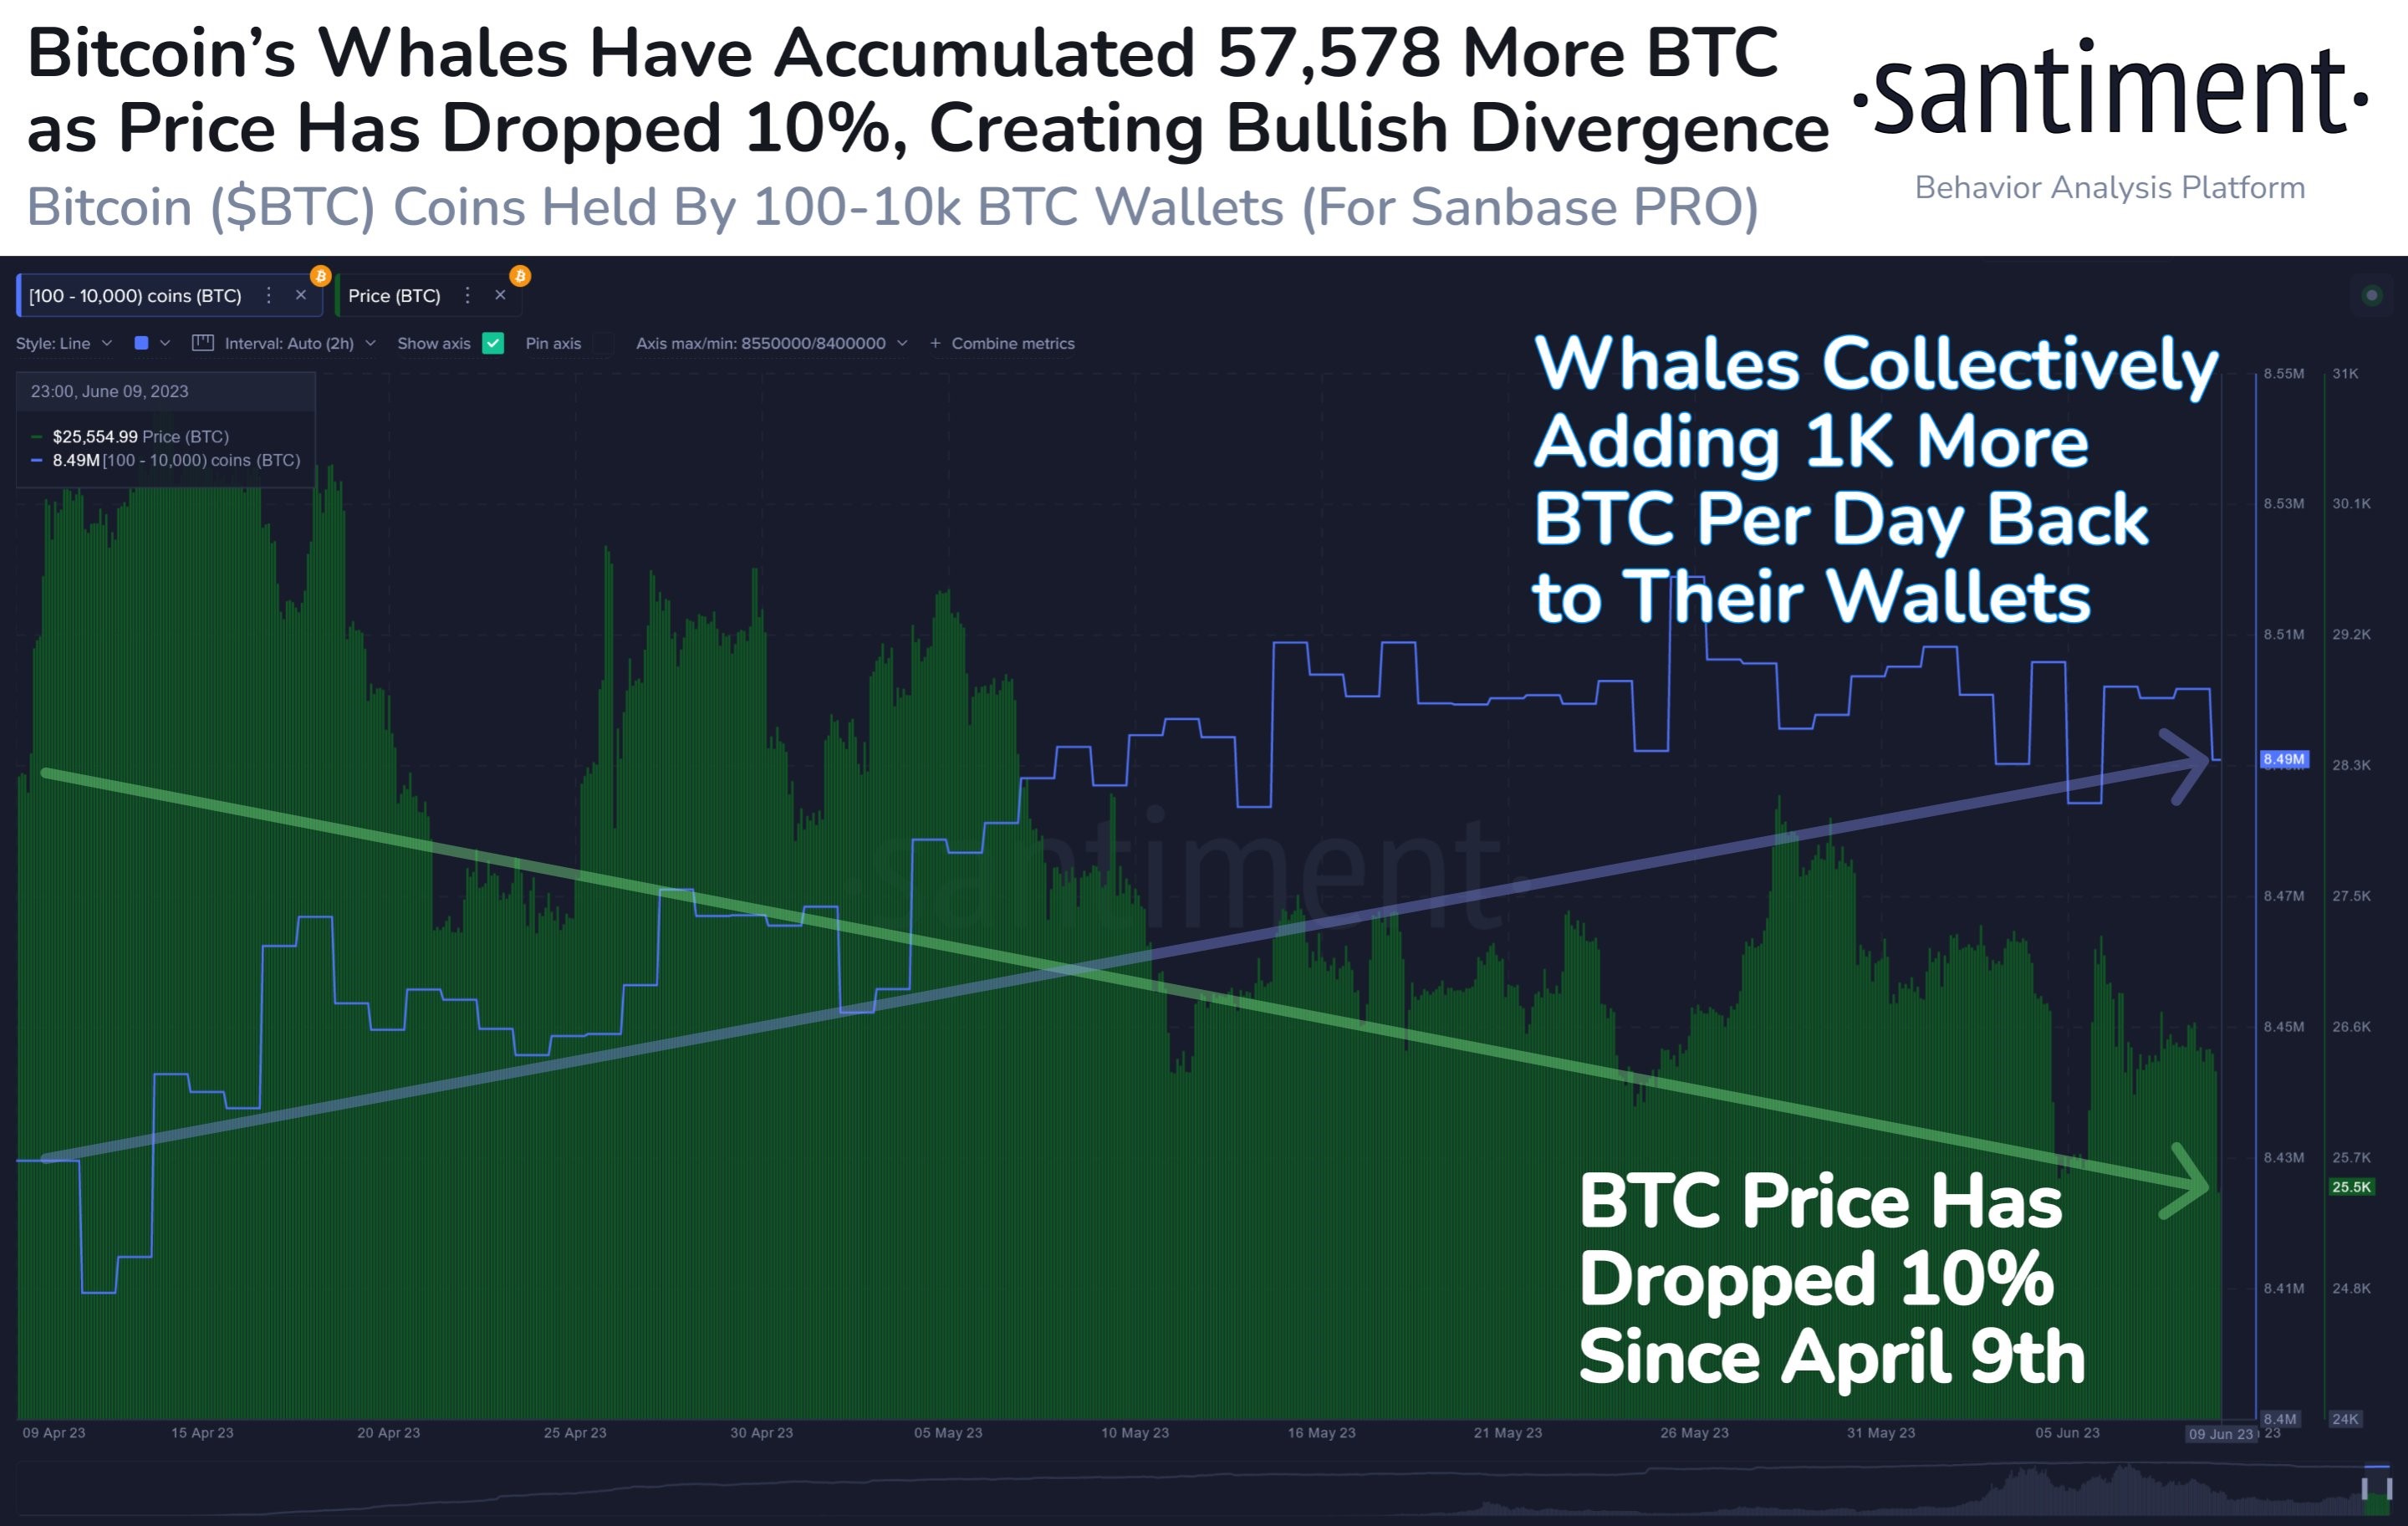 Market research report: Altcoins crushed on SEC’s new crypto witch hunt, stocks flat ahead of FED meeting - BTC Whale Acc